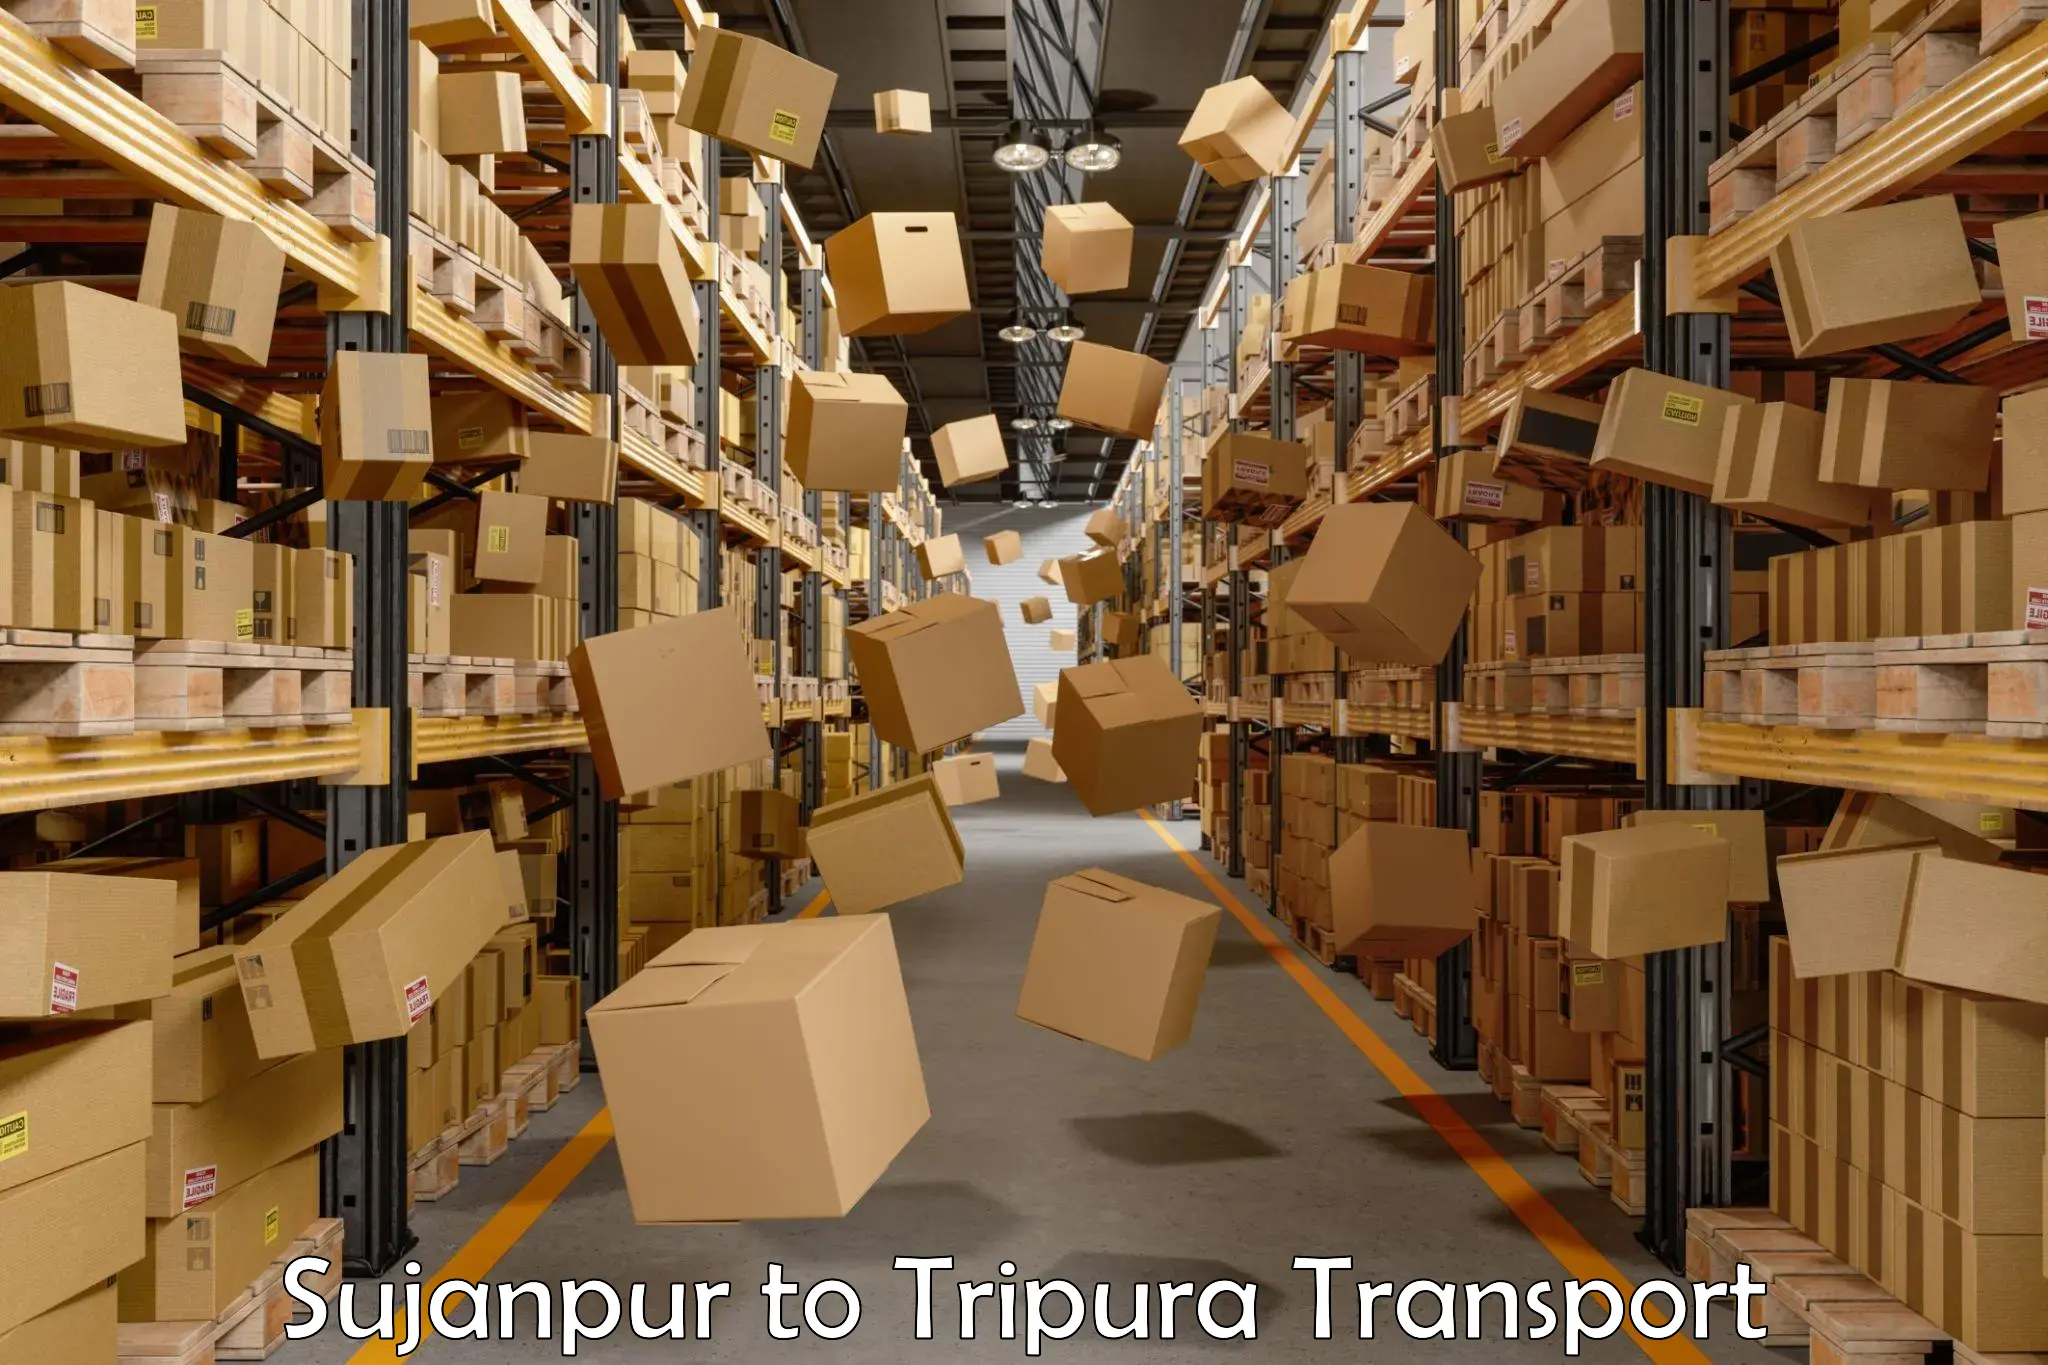 Land transport services in Sujanpur to Aambasa